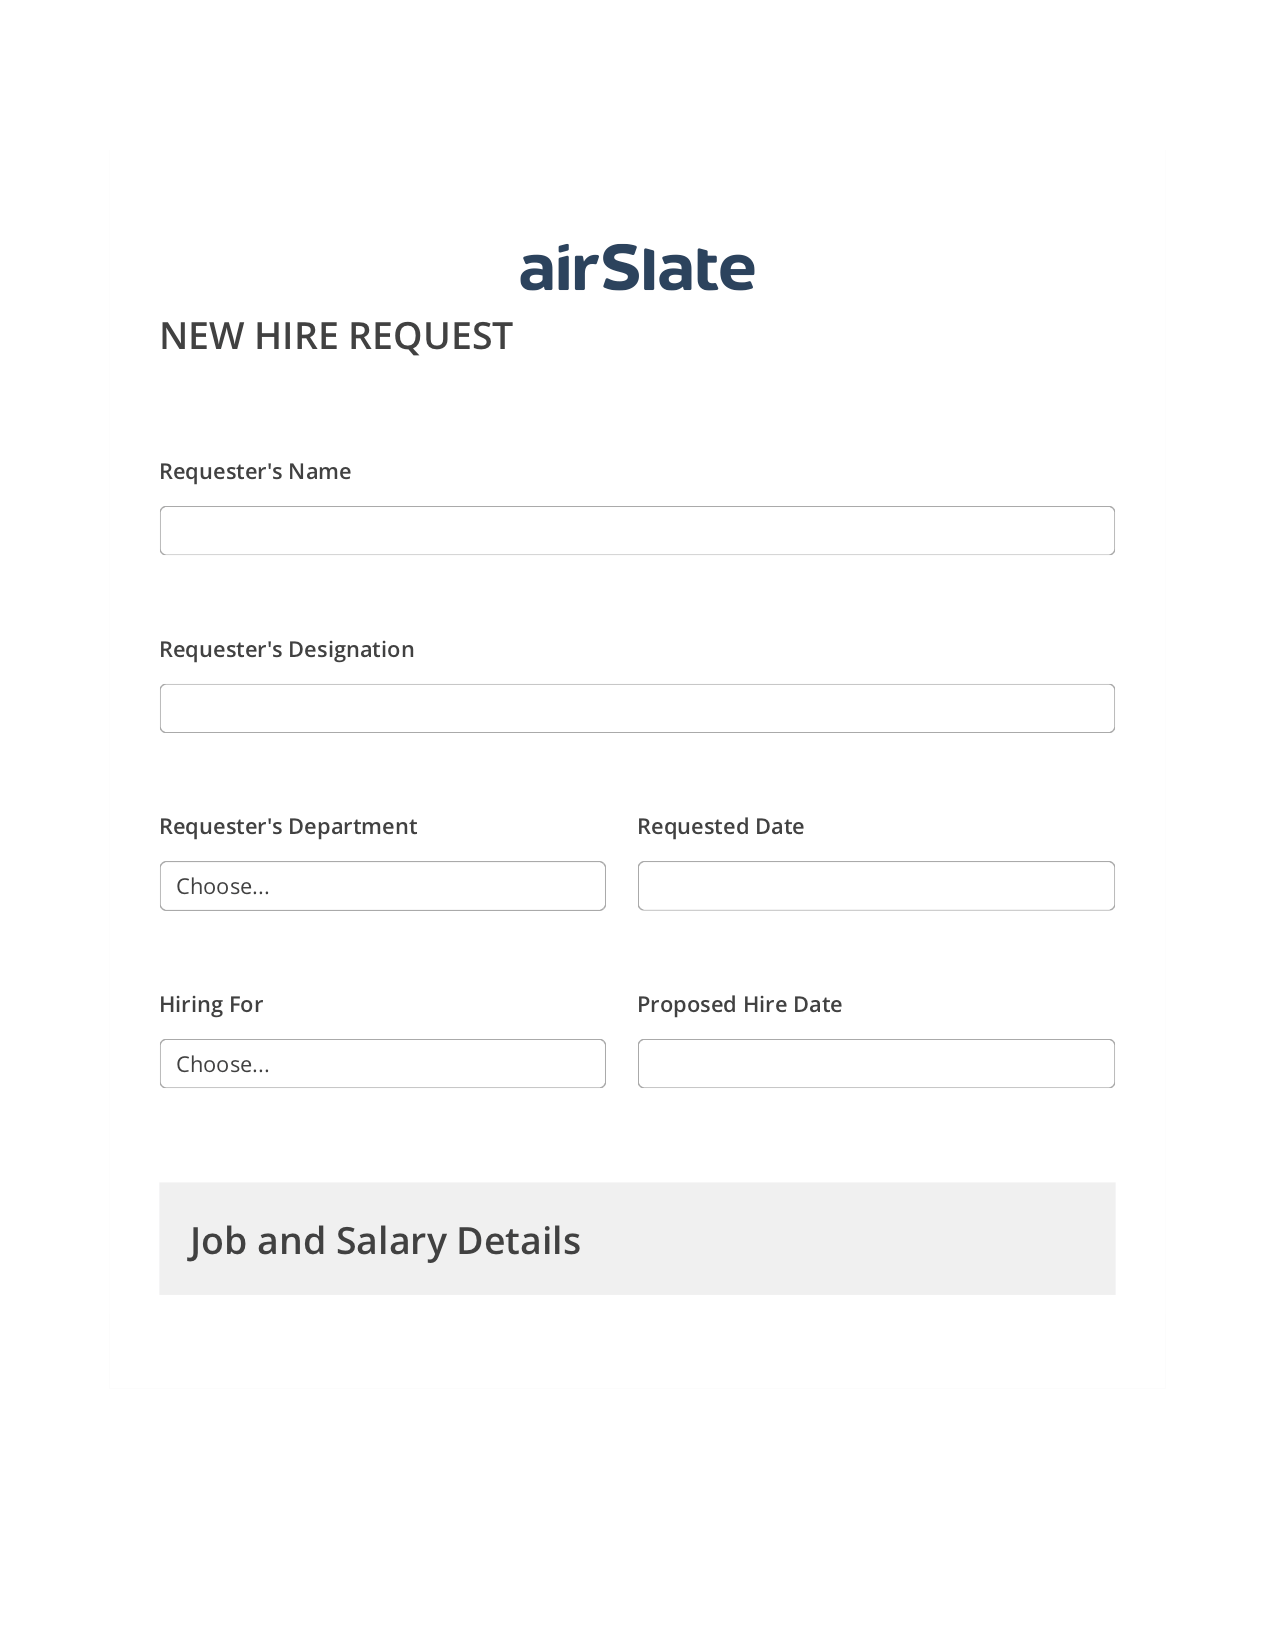 Hiring Request Workflow Pre-fill from Google Sheets Bot, Google Calendar Bot, Post-finish Document Bot